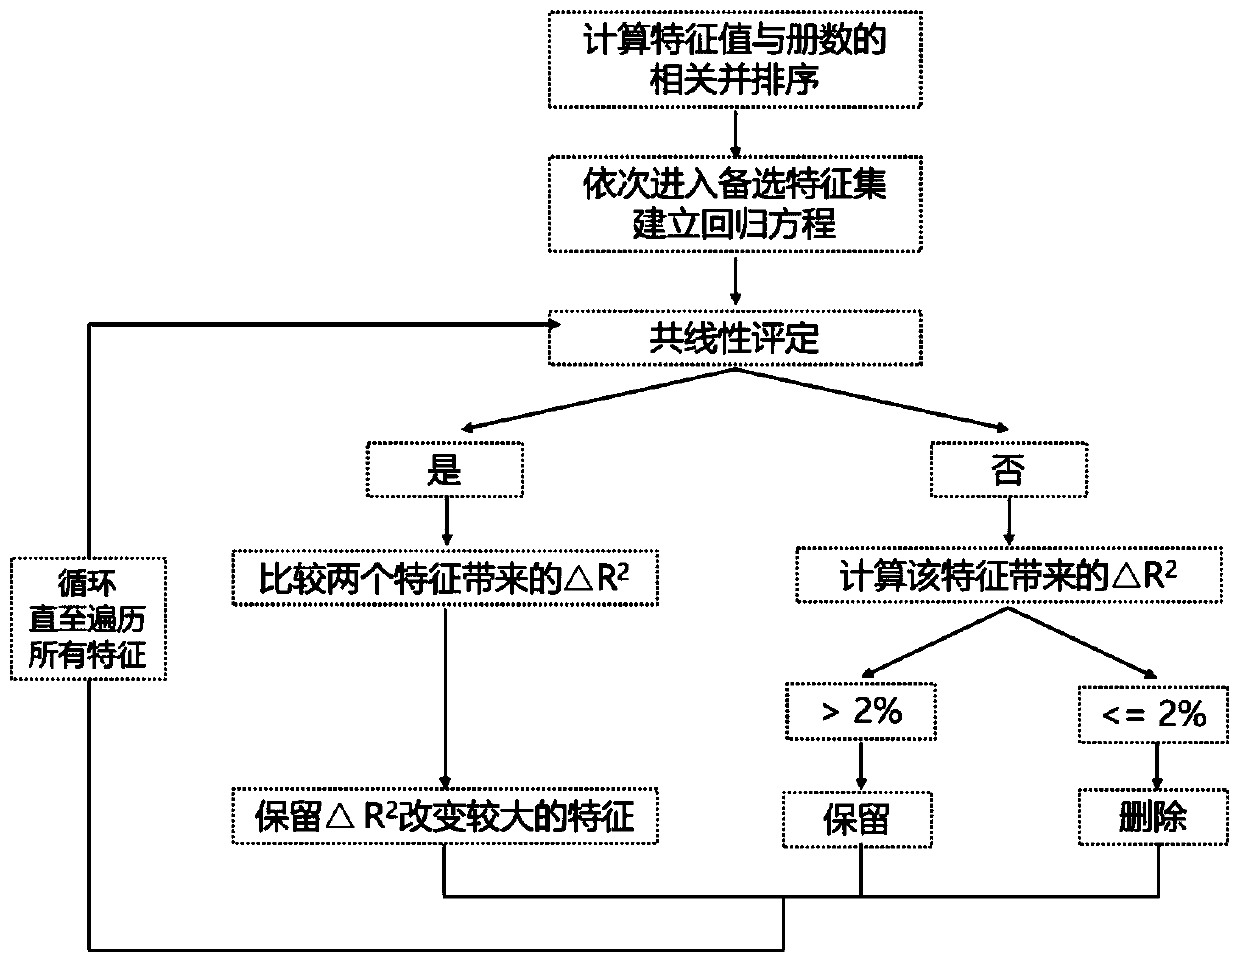 Hierarchical evaluation modeling method for readability of a simplified Chinese text